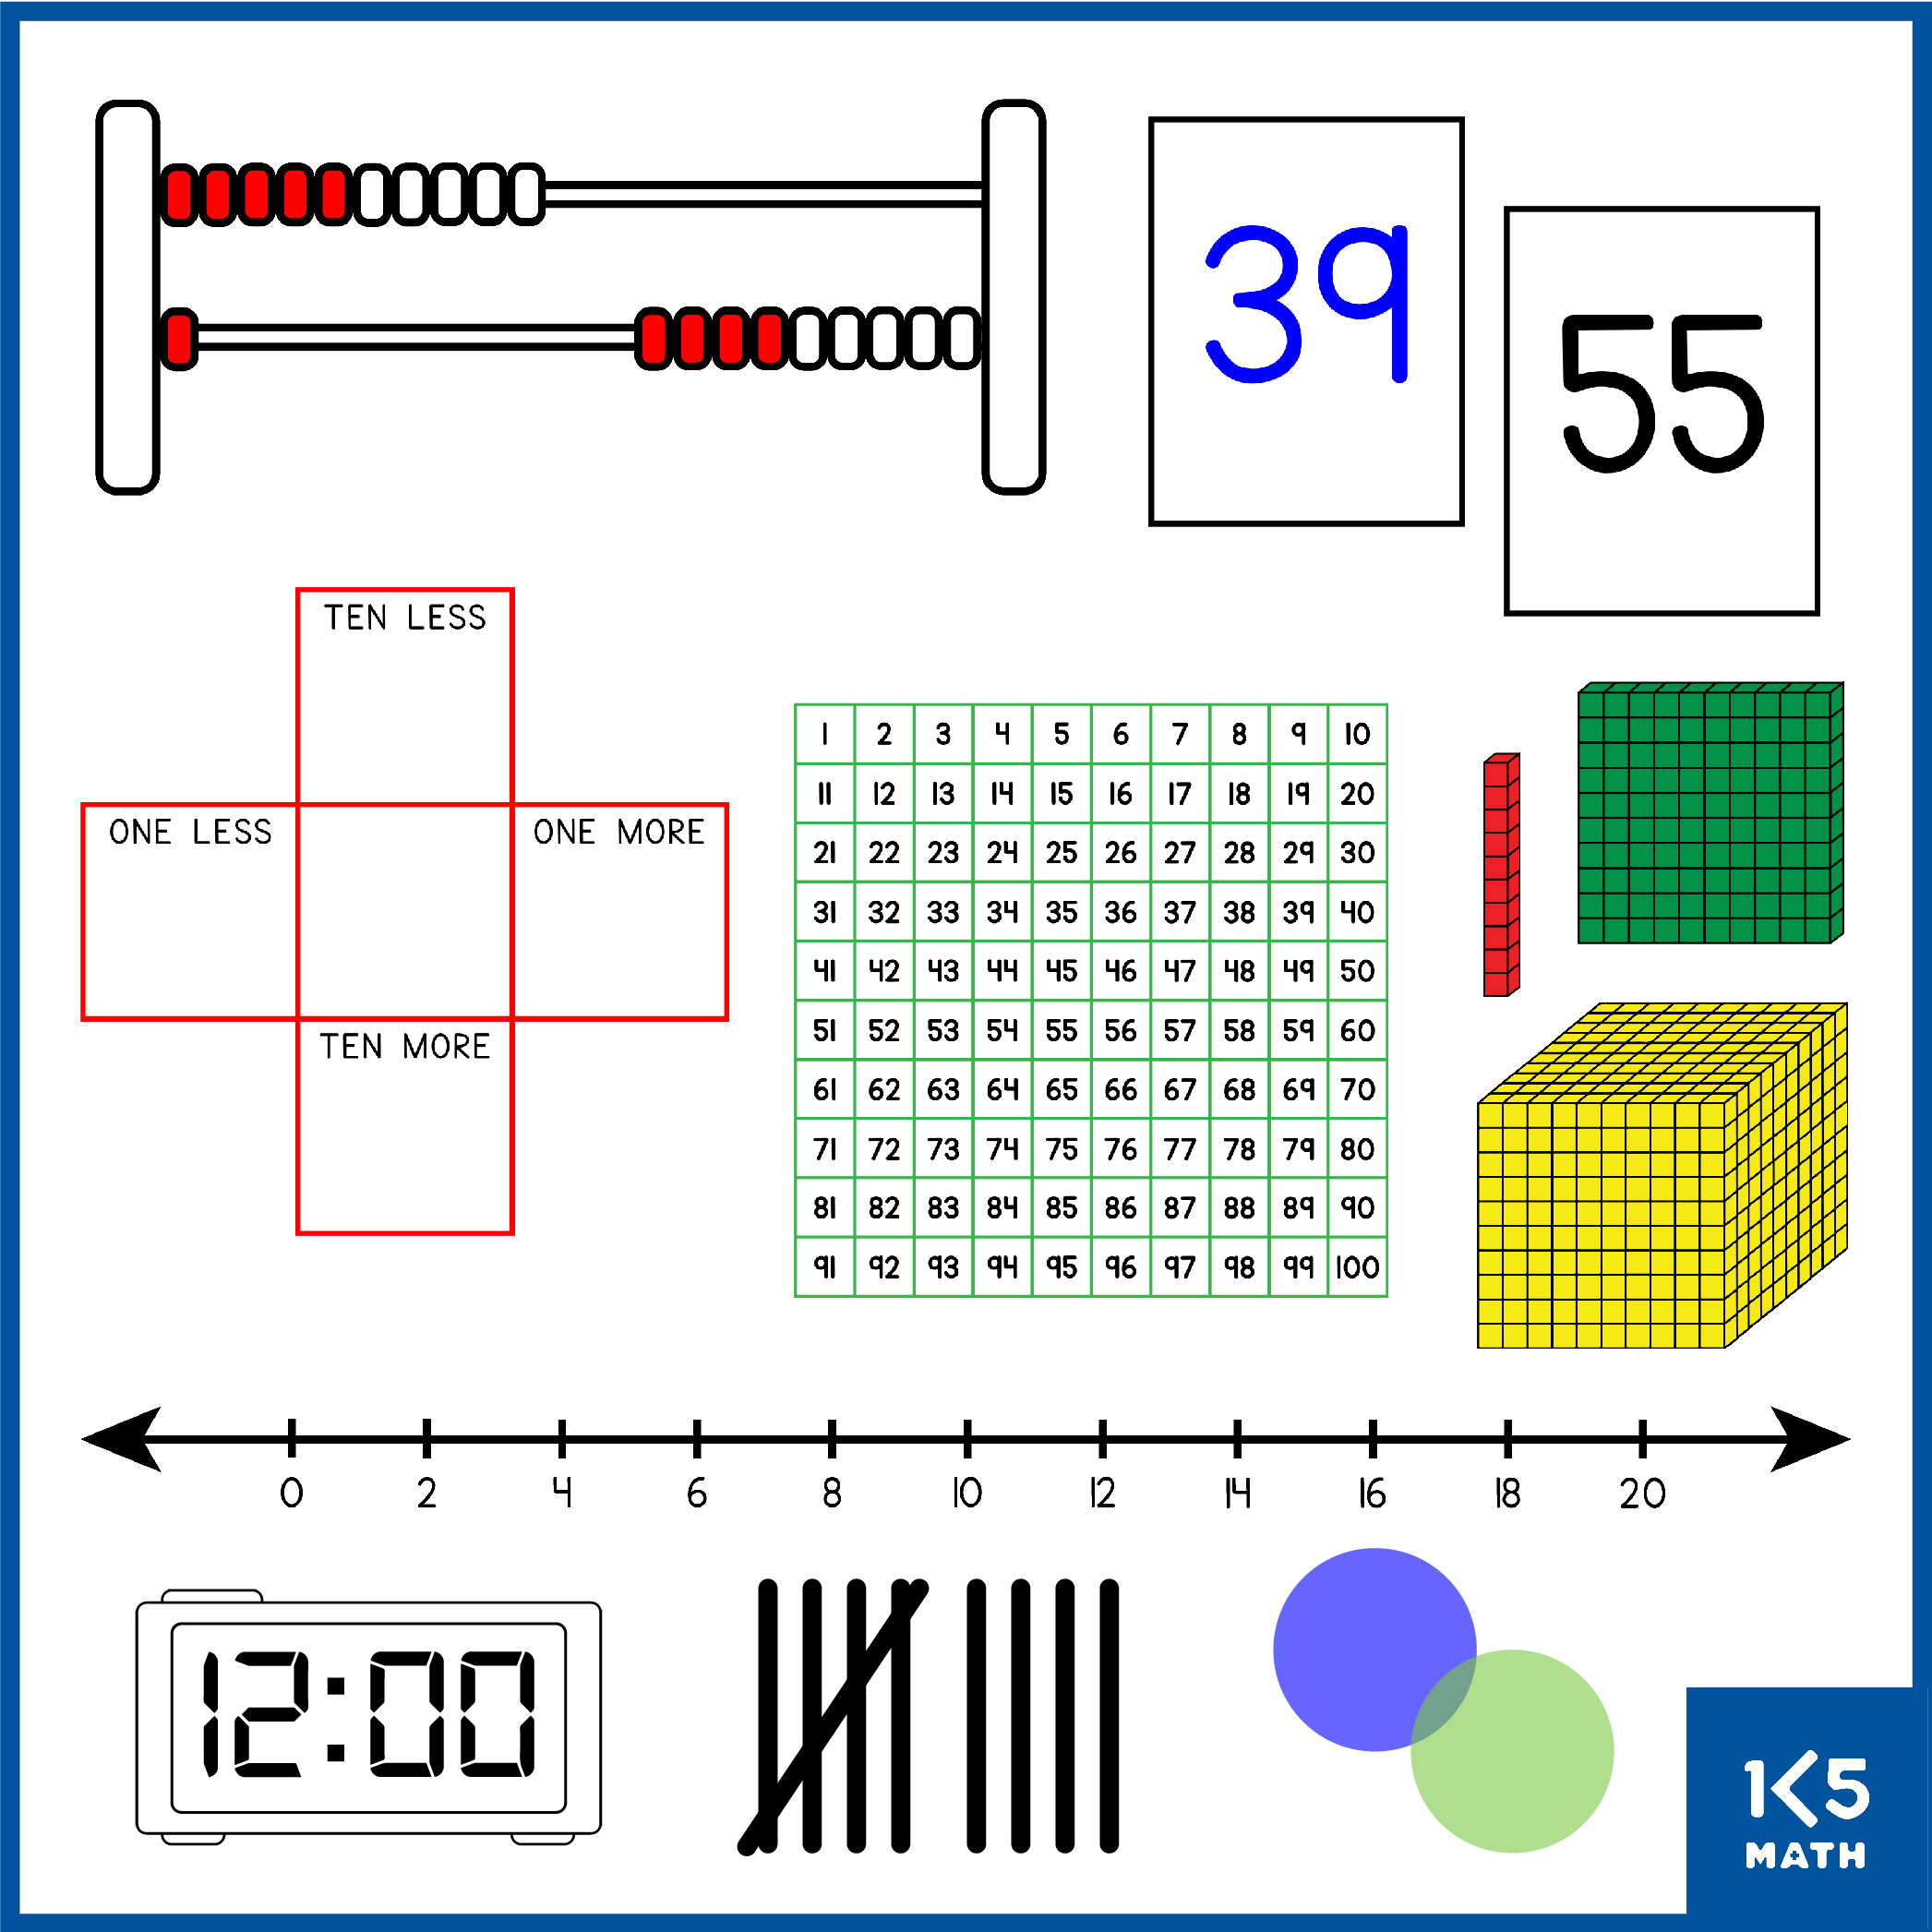 K-2 math images for your educational resources.